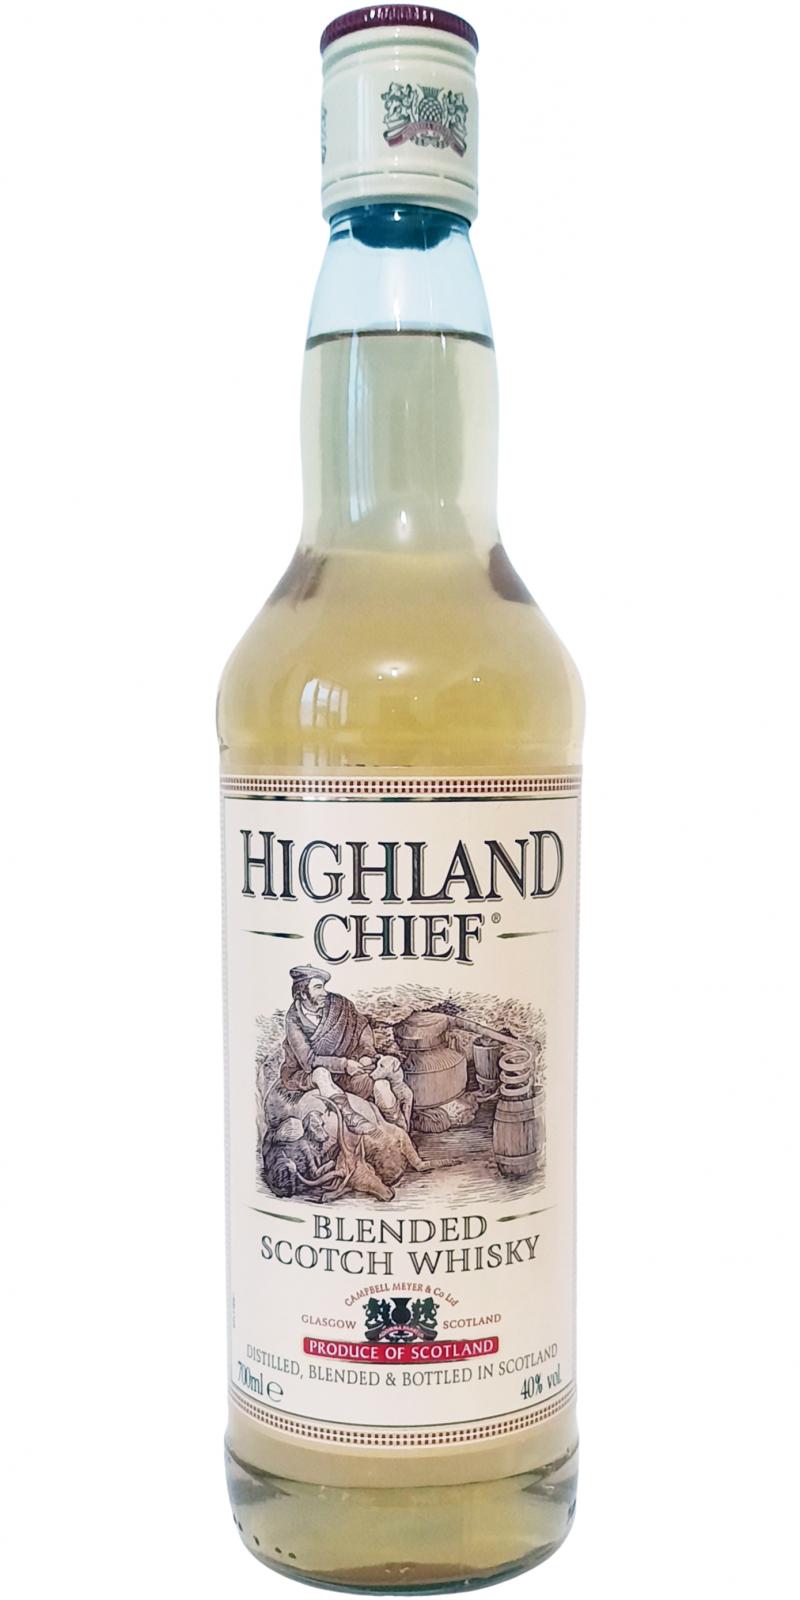 Highland Chief Blended Scotch Whisky CM&C